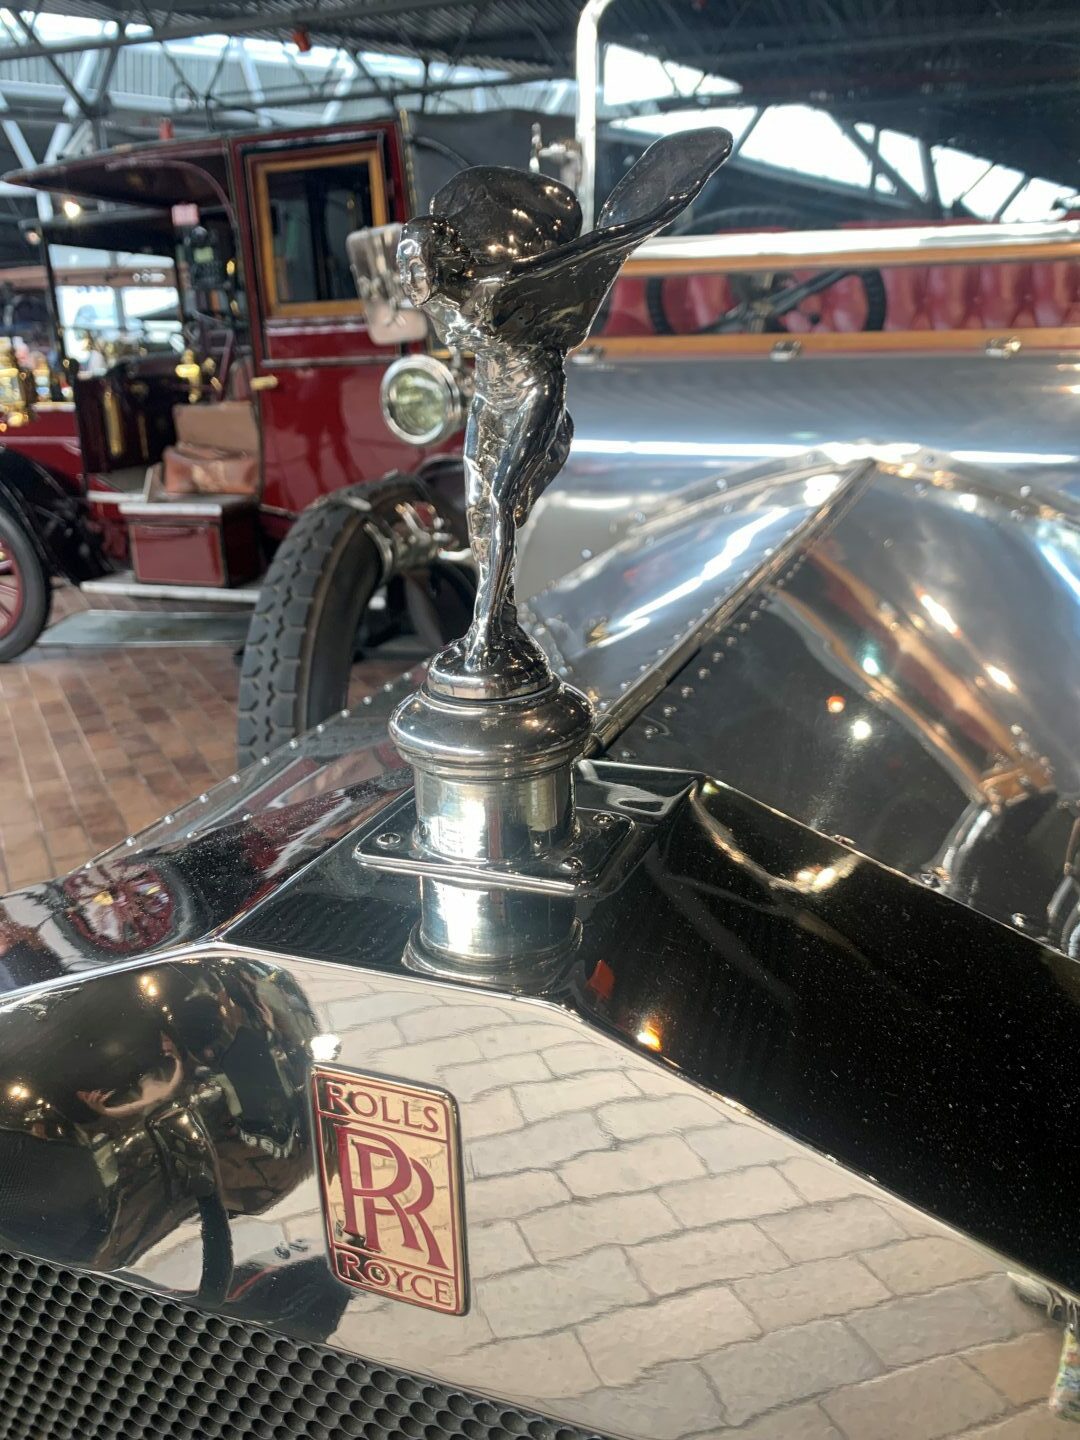 A close up of the Spirit of Ecstasy bonnet ornament on the 1909 Silver Ghost. Image: Kirstie Waterston/DC Thomson.